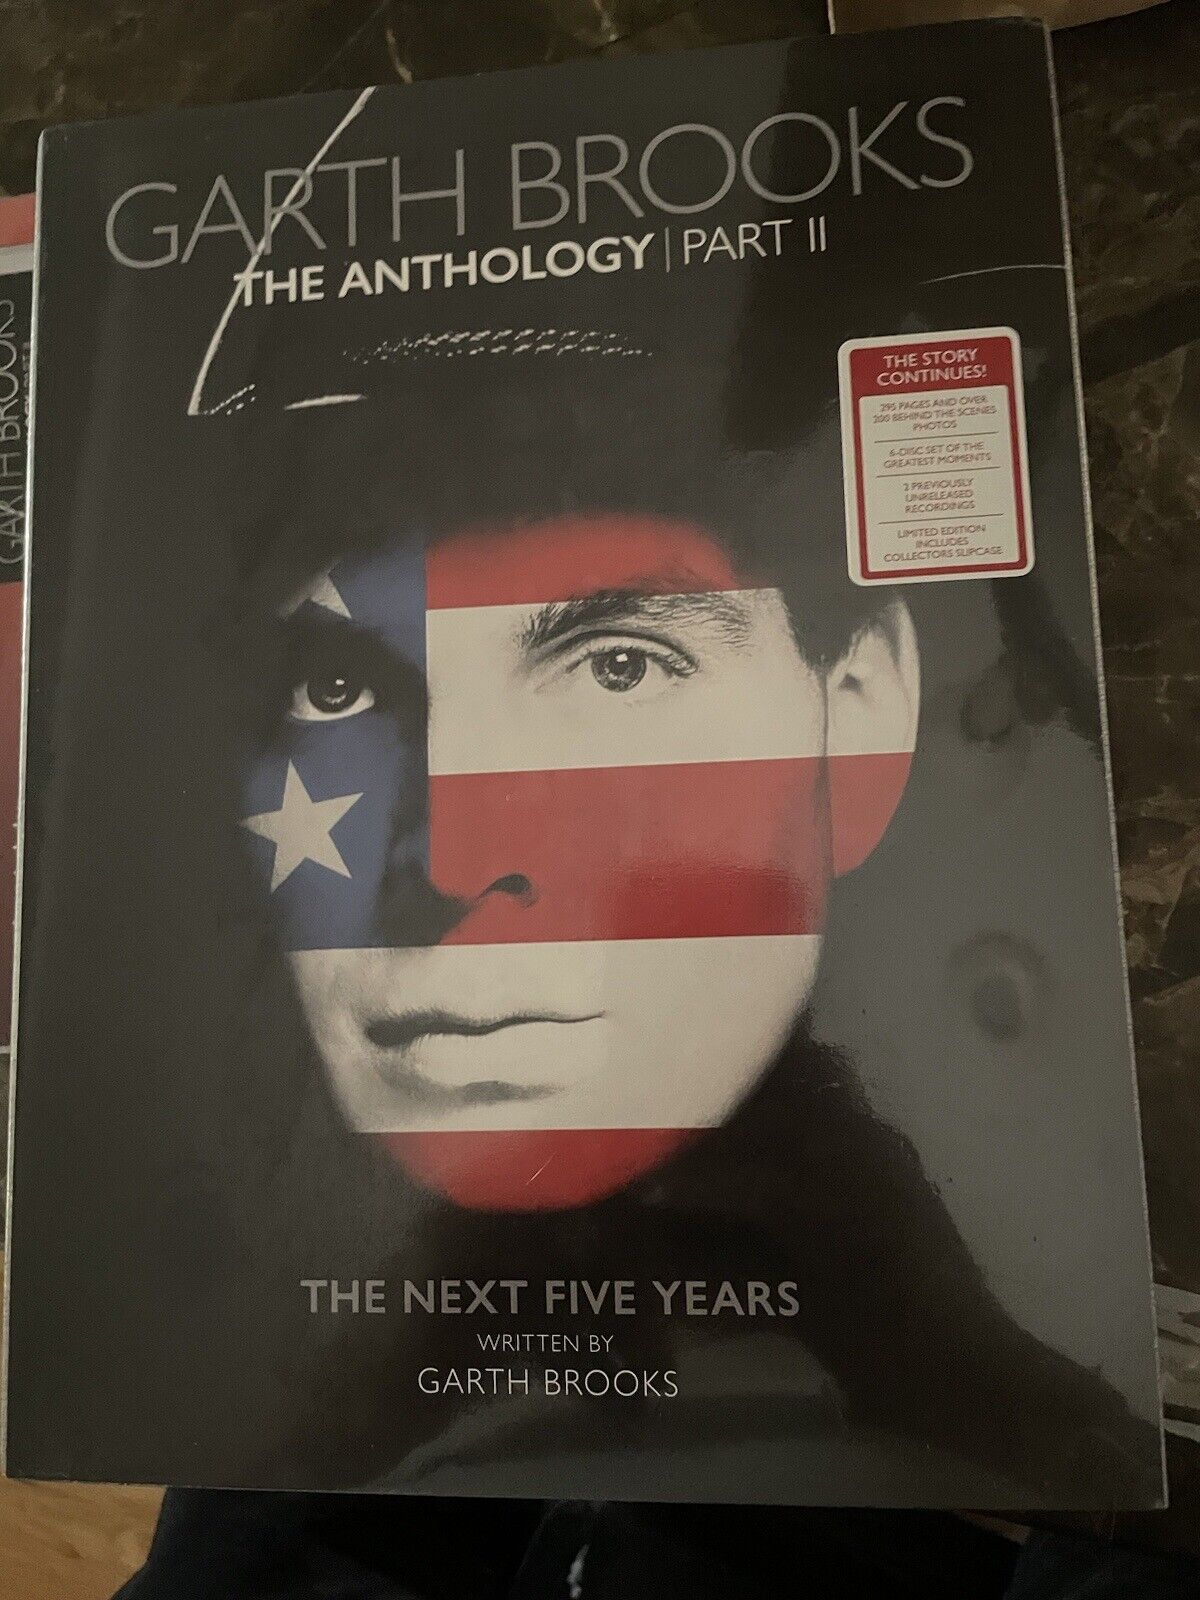 GARTH BROOKS ANTHOLOGY PART II (2) SPECIAL EDITION THE NEXT 5 YEARS- LAST ONE